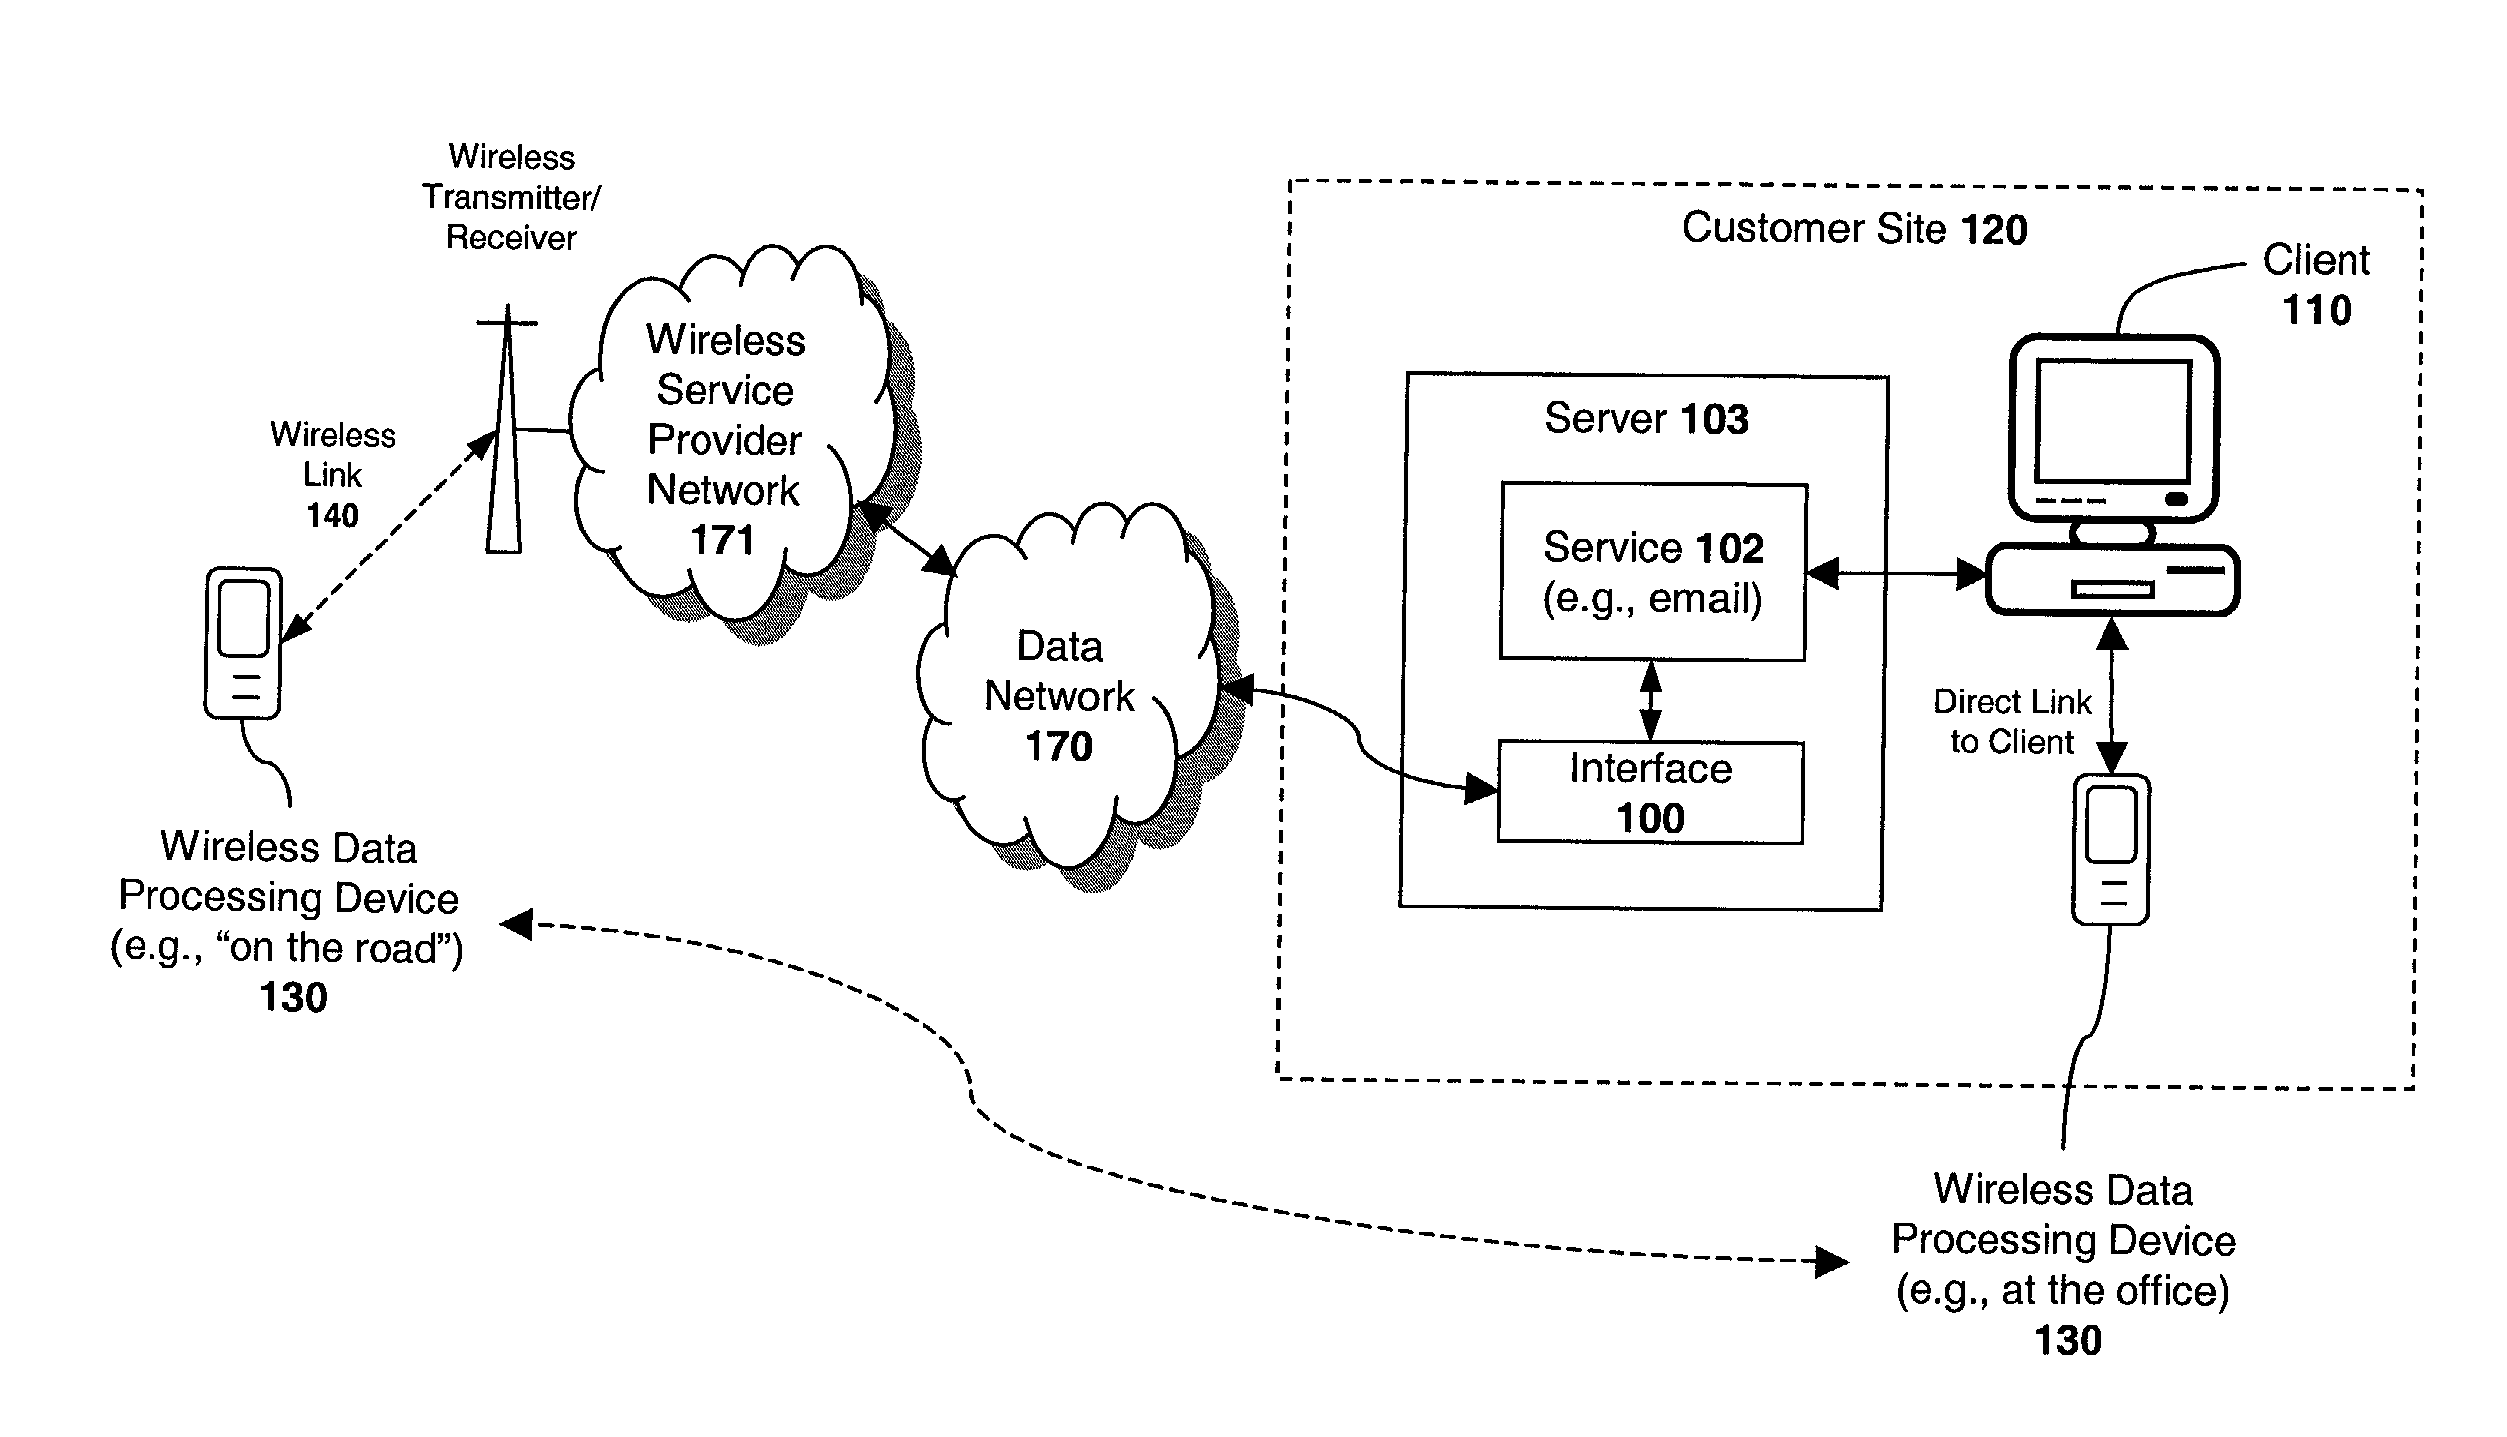 Apparatus and method for conserving bandwidth by batch processing data transactions